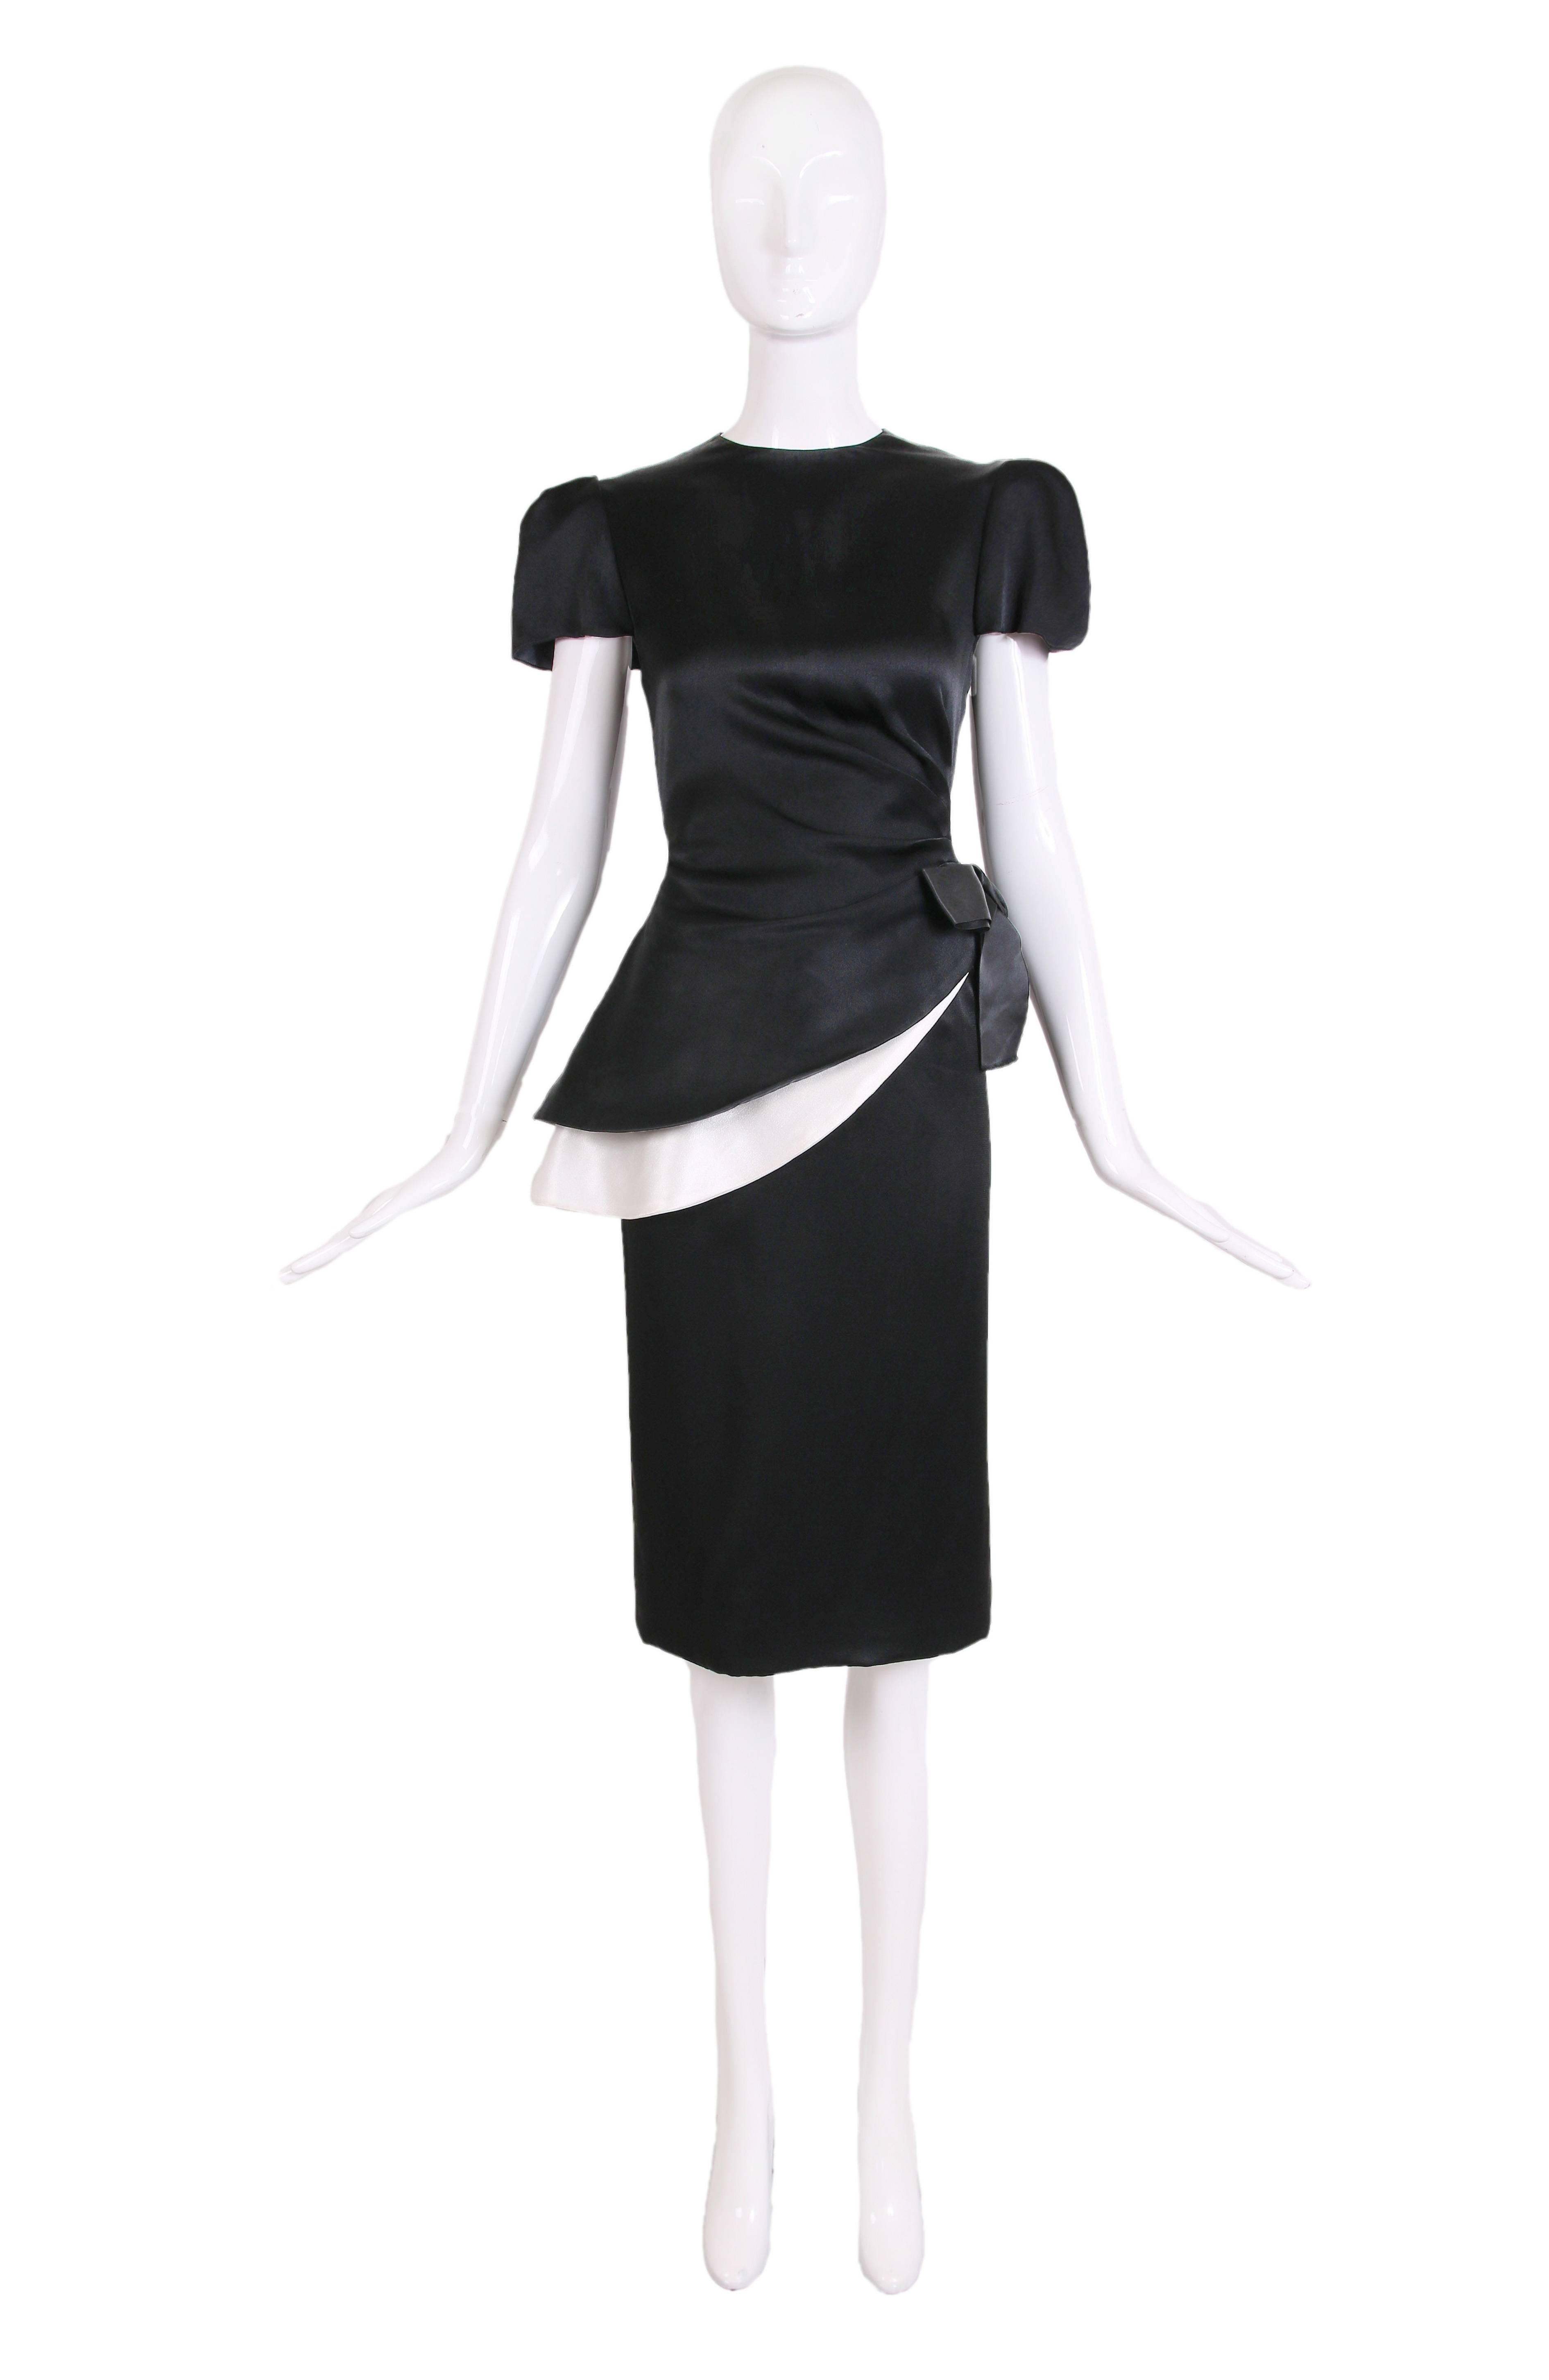 1970's Bill Blass black and white asymmetric silk blouse w/silk bow at side and two matching pencil skirts - one black and one white. The blouse has a high neckline, structured cap sleeves, and two hidden zipper closures - one at the side and one at